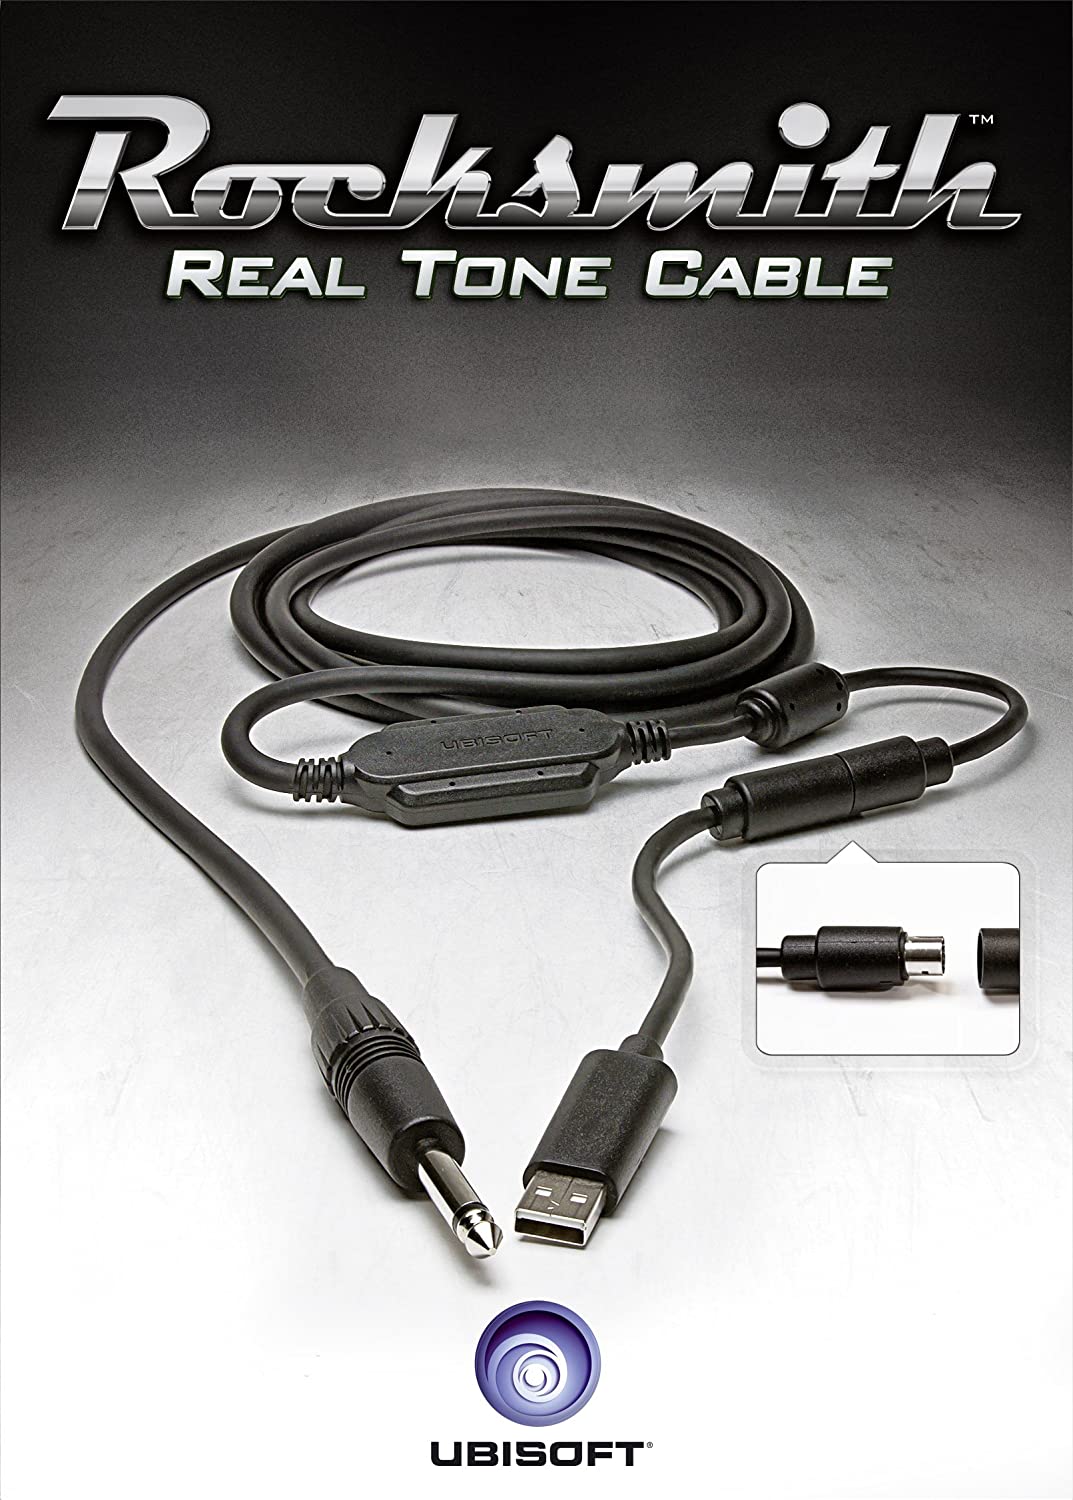 Cable Rocksmith Real Tone